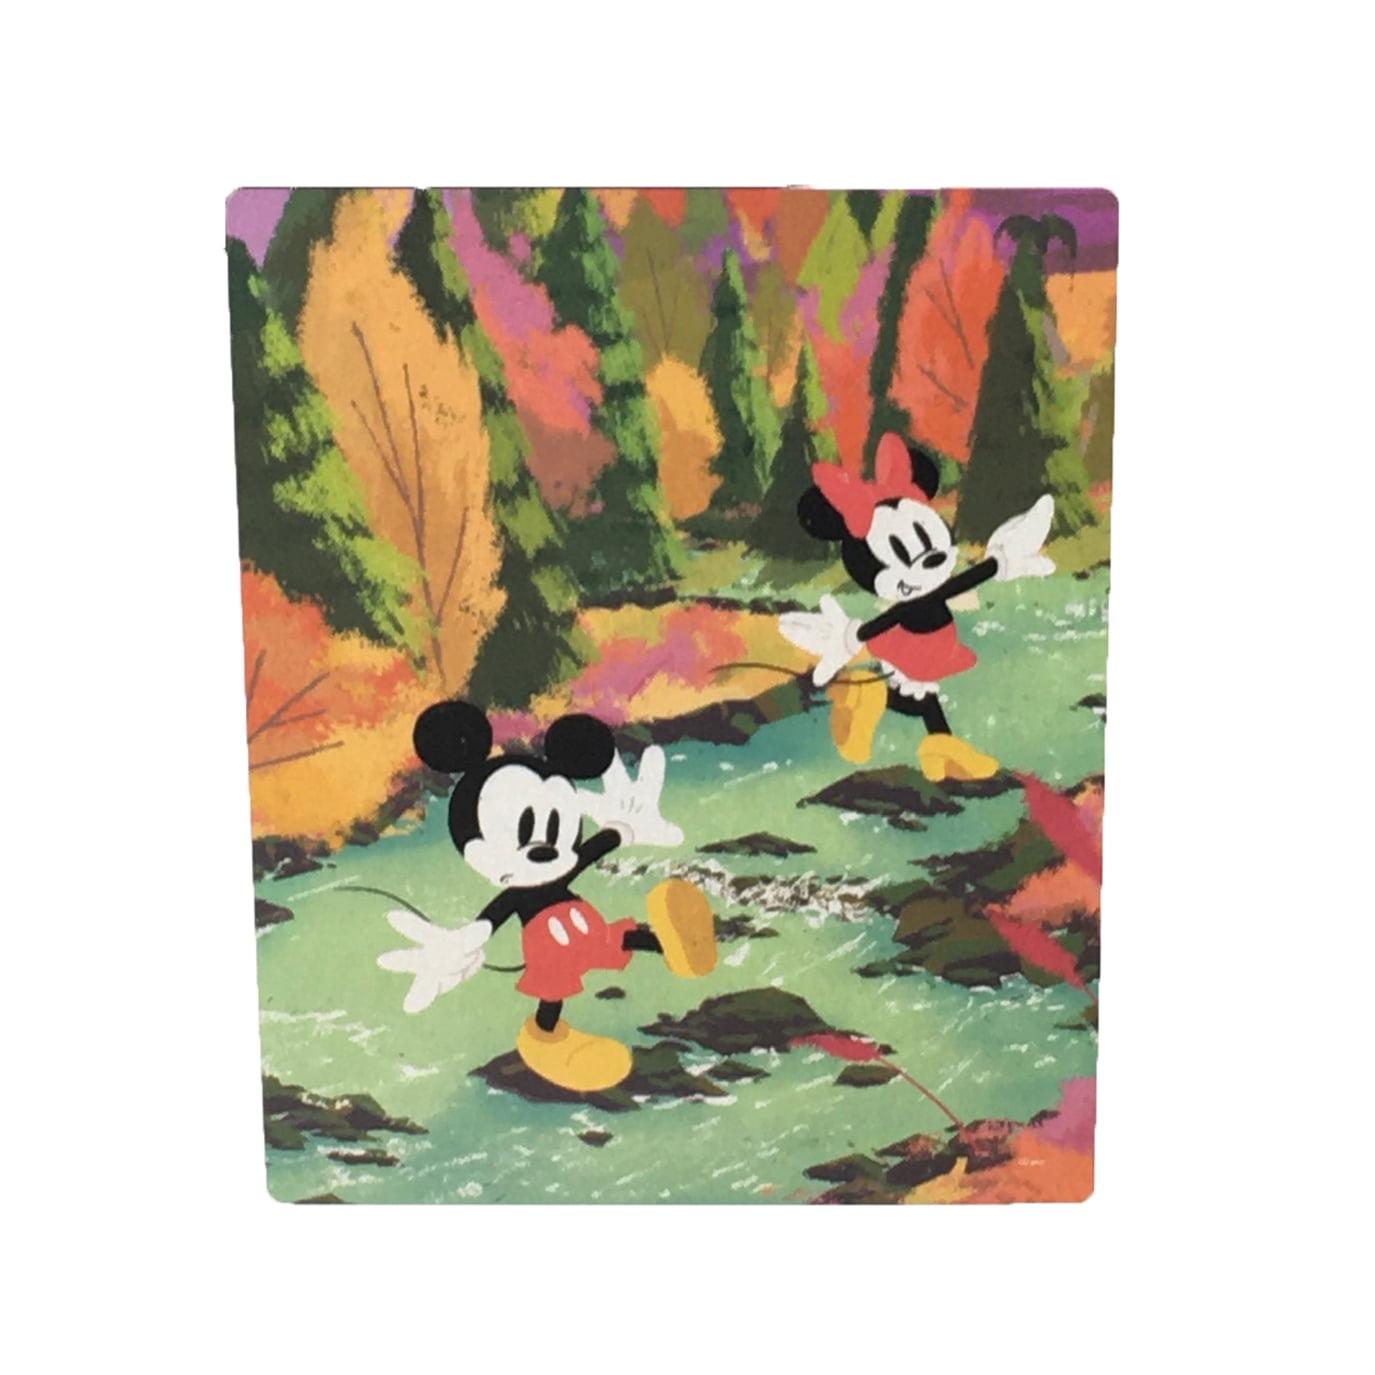 New Disney 500 Piece Jigsaw Puzzle Minnie Mouse Mickey Mouse 3 pcs Lot 